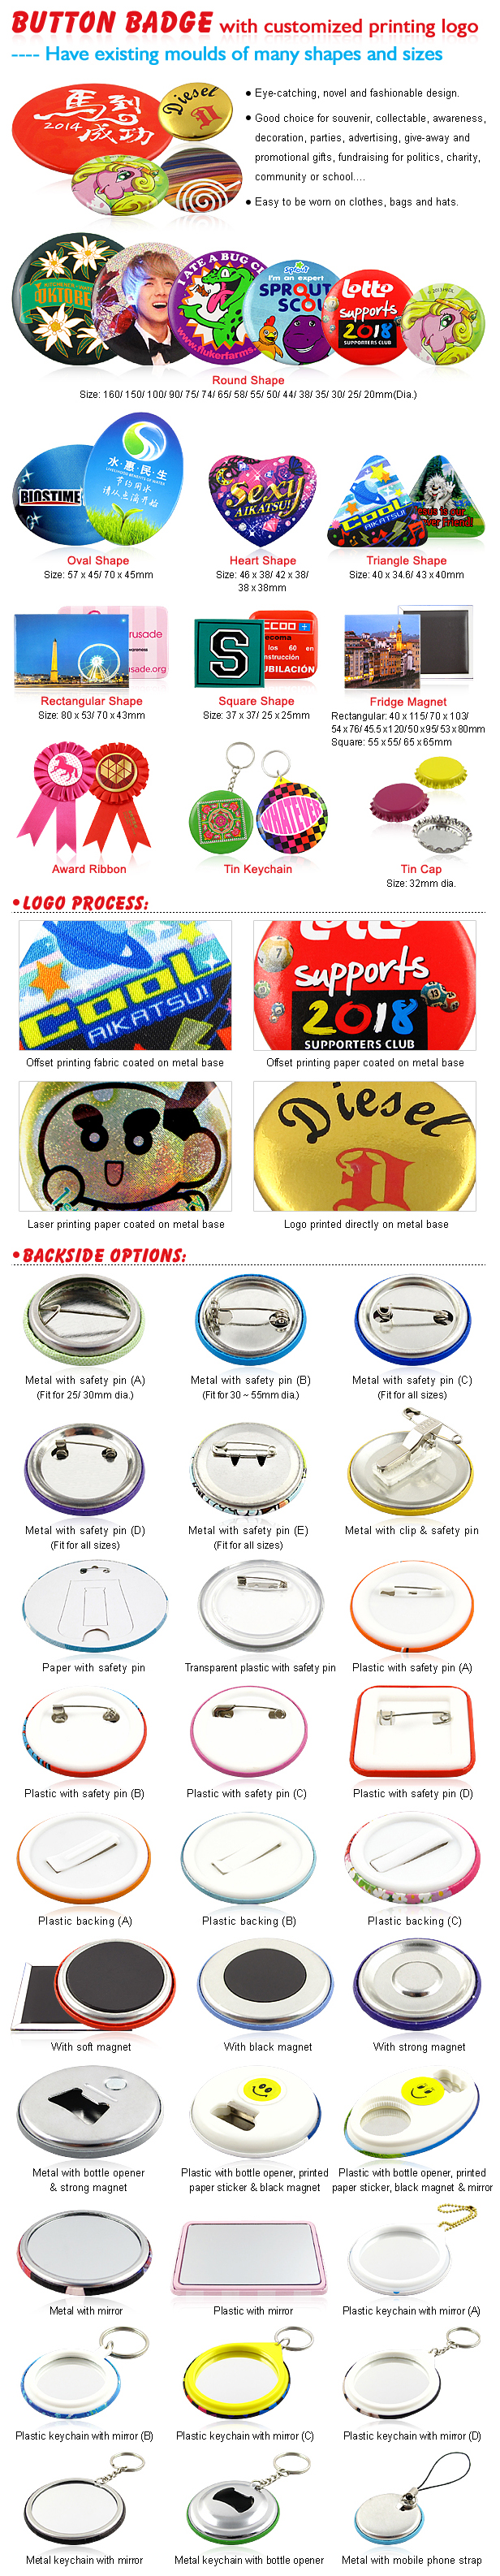 https://www.sjjgifts.com/news/the-ultimate-guide-to-custom-button-badges/ 